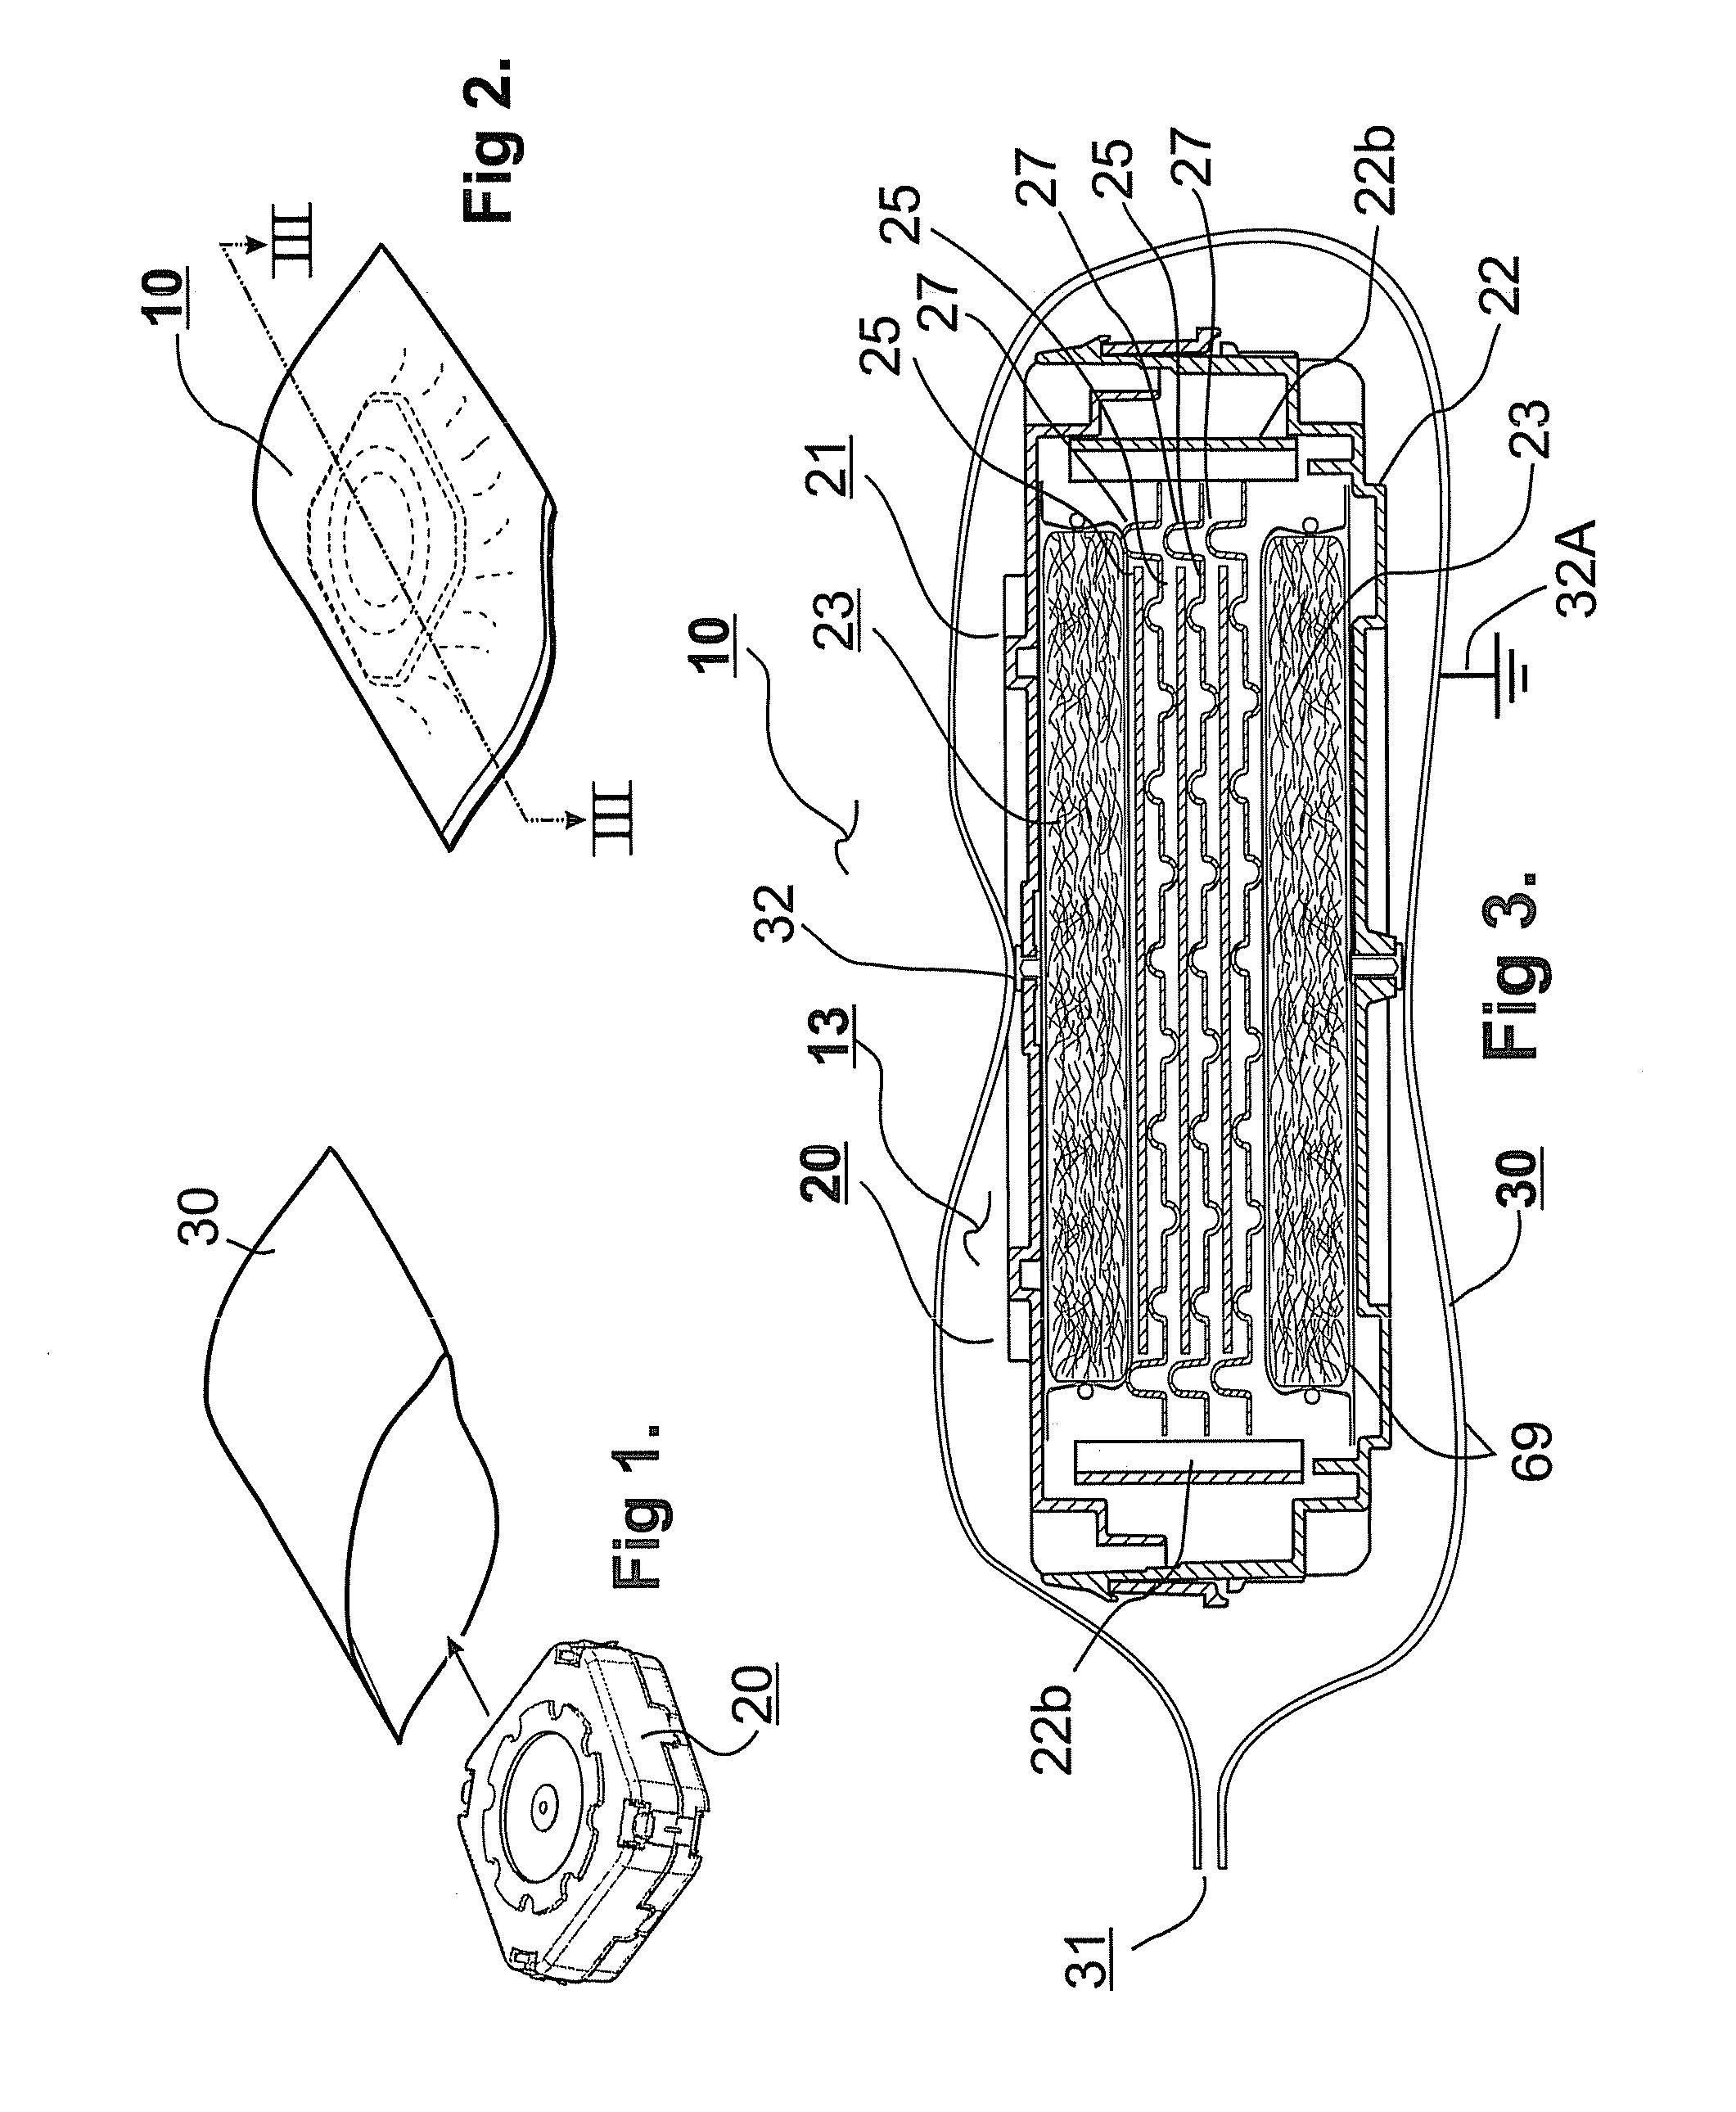 Packaging system for protection of IC wafers during fabrication, transport and storage